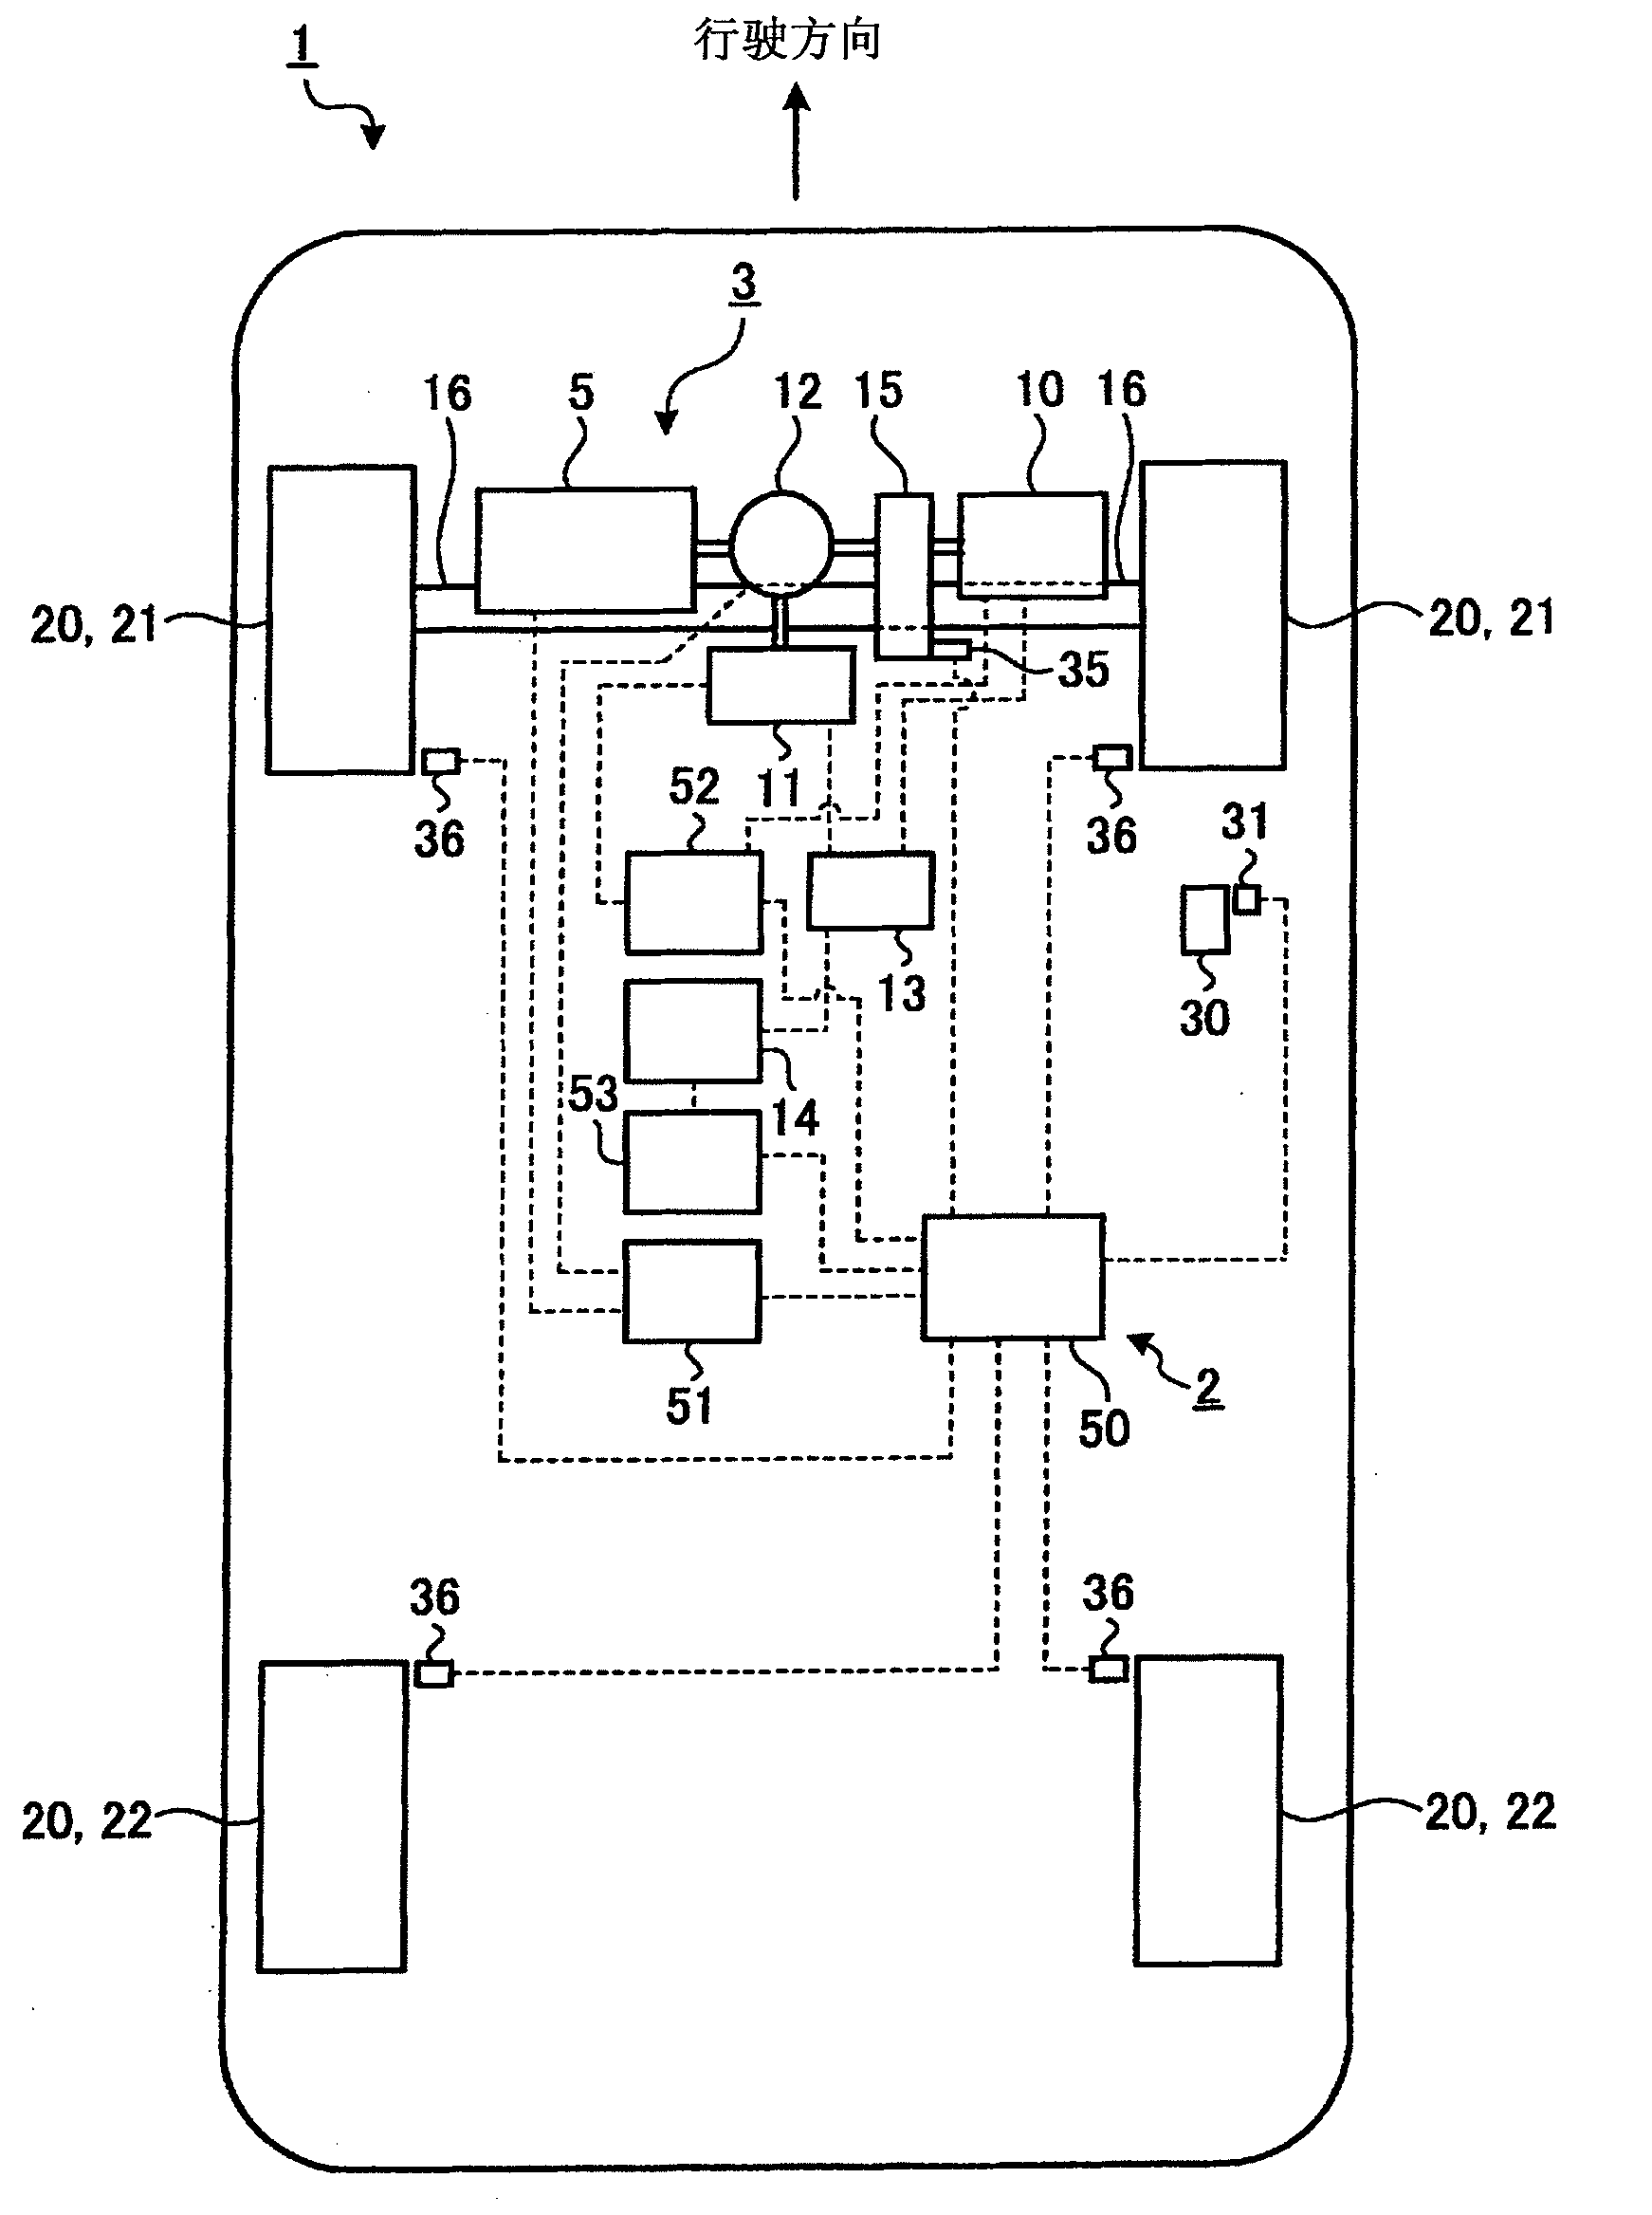 Damping control device